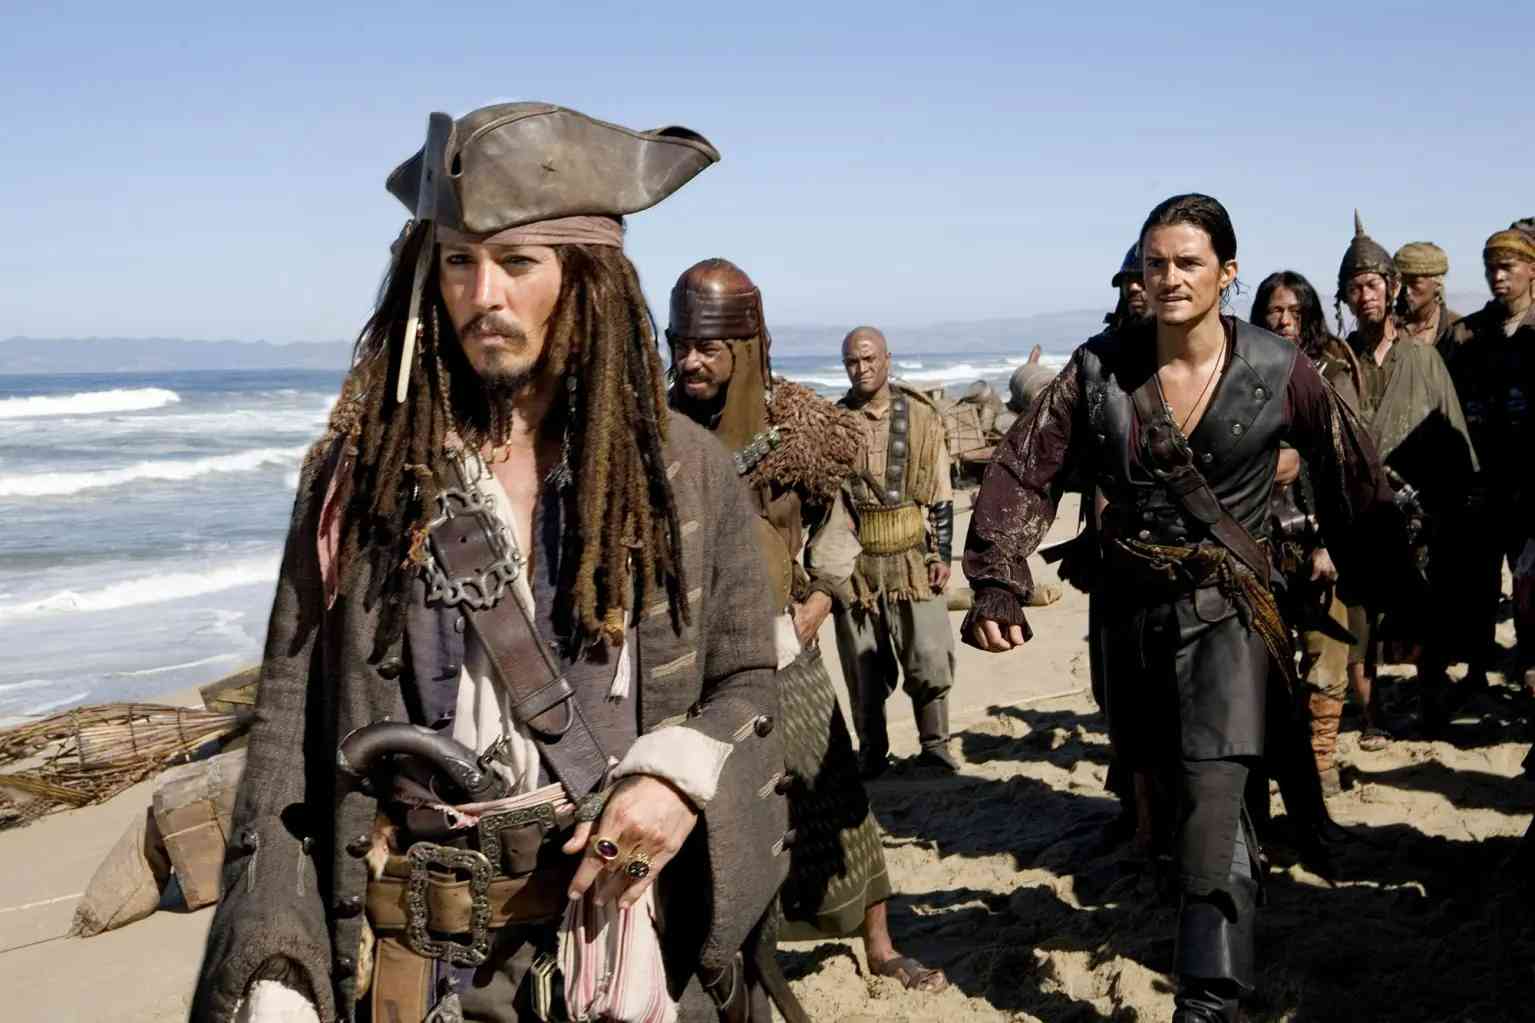 Pirates-of-the-Caribbean:-At-World's-End-in-UAE